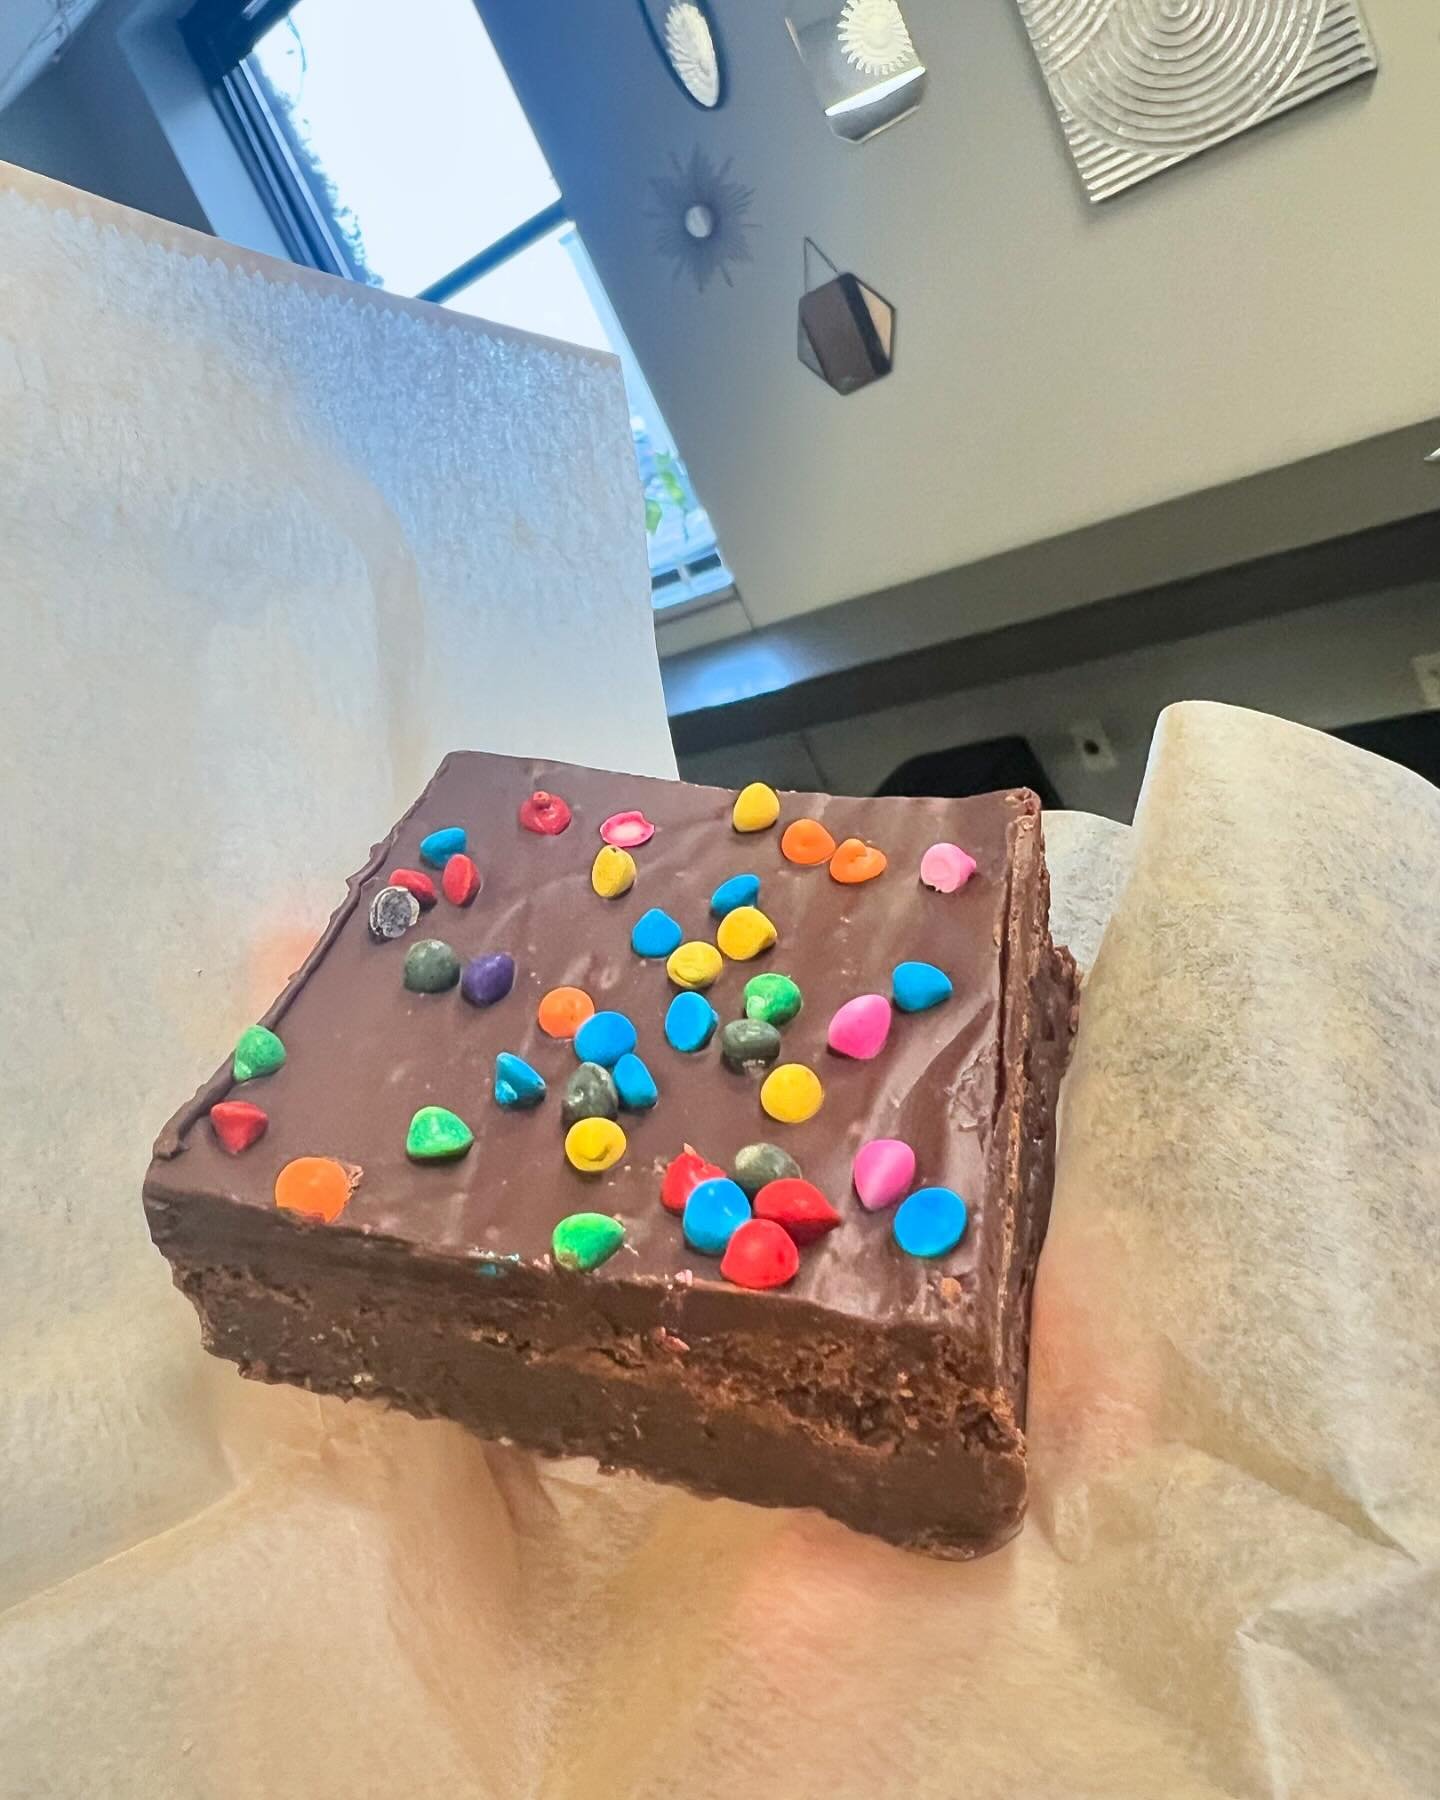 Cosmic Brownies at both shops this week! Waseca&rsquo;s dining room is OPEN🧁

Vanilla Bean Cupcakes
Triple Chocolate Cupcakes
Key Lime Cupcakes
Chocolate Salted Caramel Cupcakes
Hot Fudge Sundae Cupcakes
Cinnamon Maple Pecan Cupcakes
Gluten Friendly